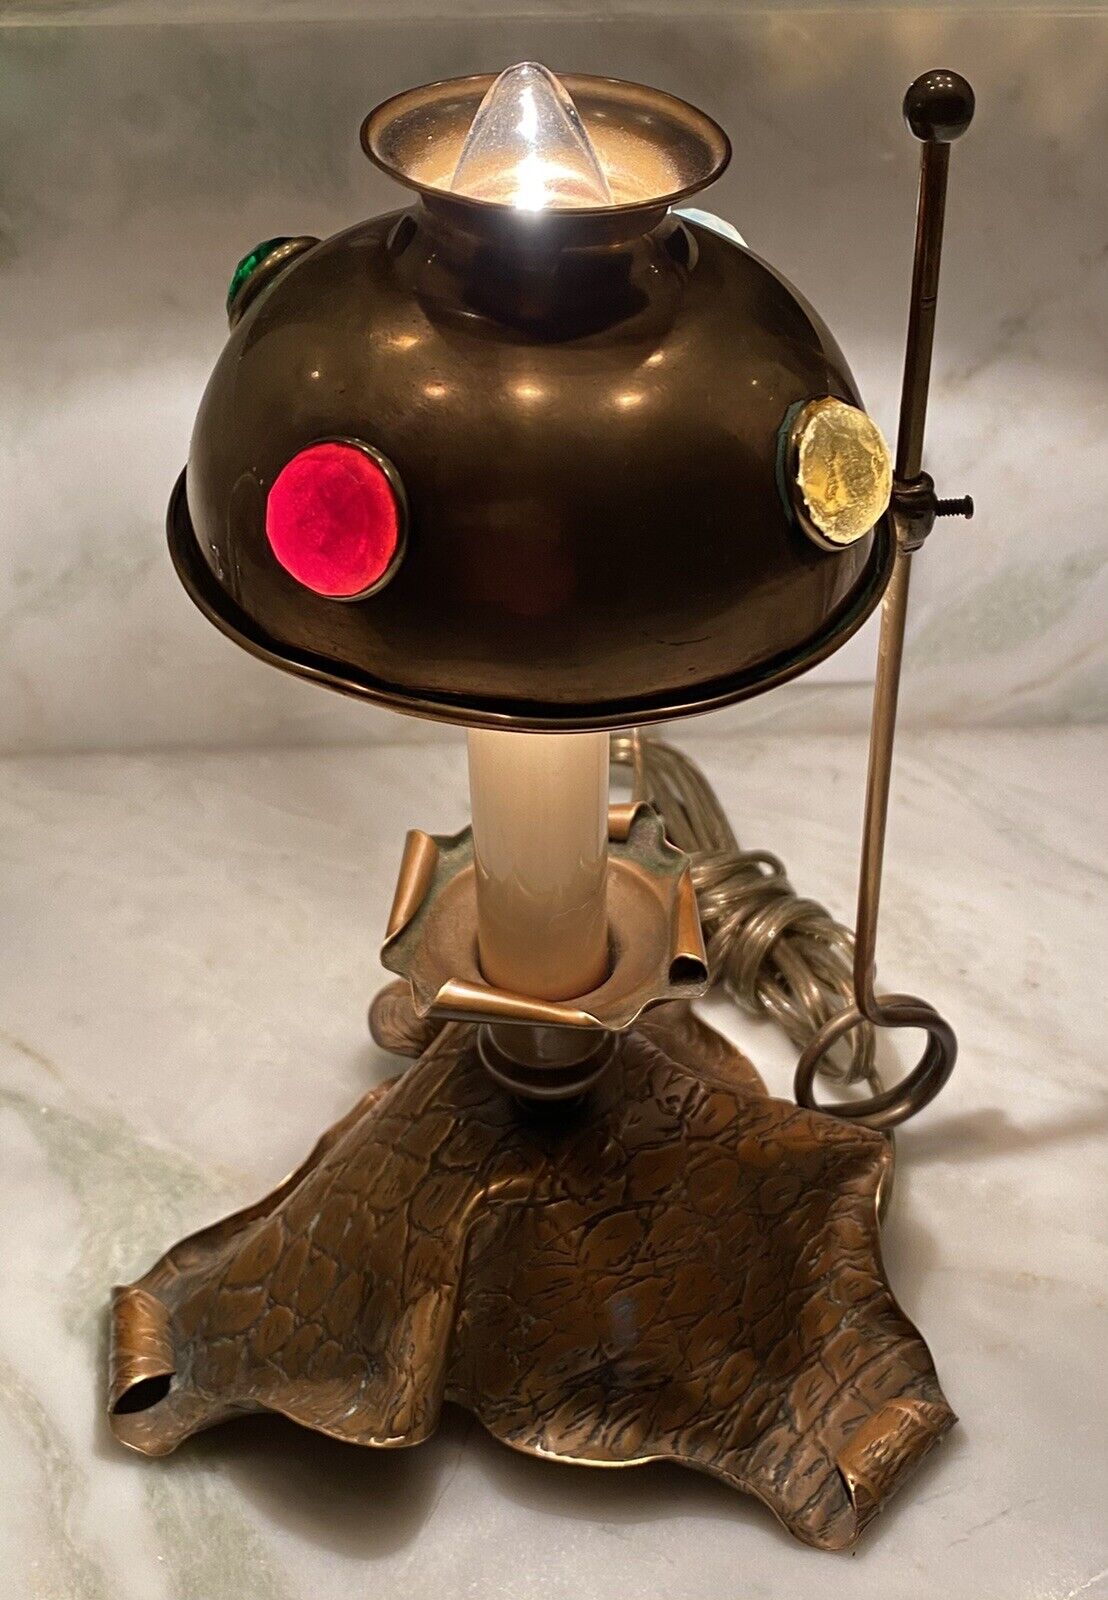 Beyond Stunning Way Beyond Rare Art Nouveau Copper Lamp With Glass Jewels